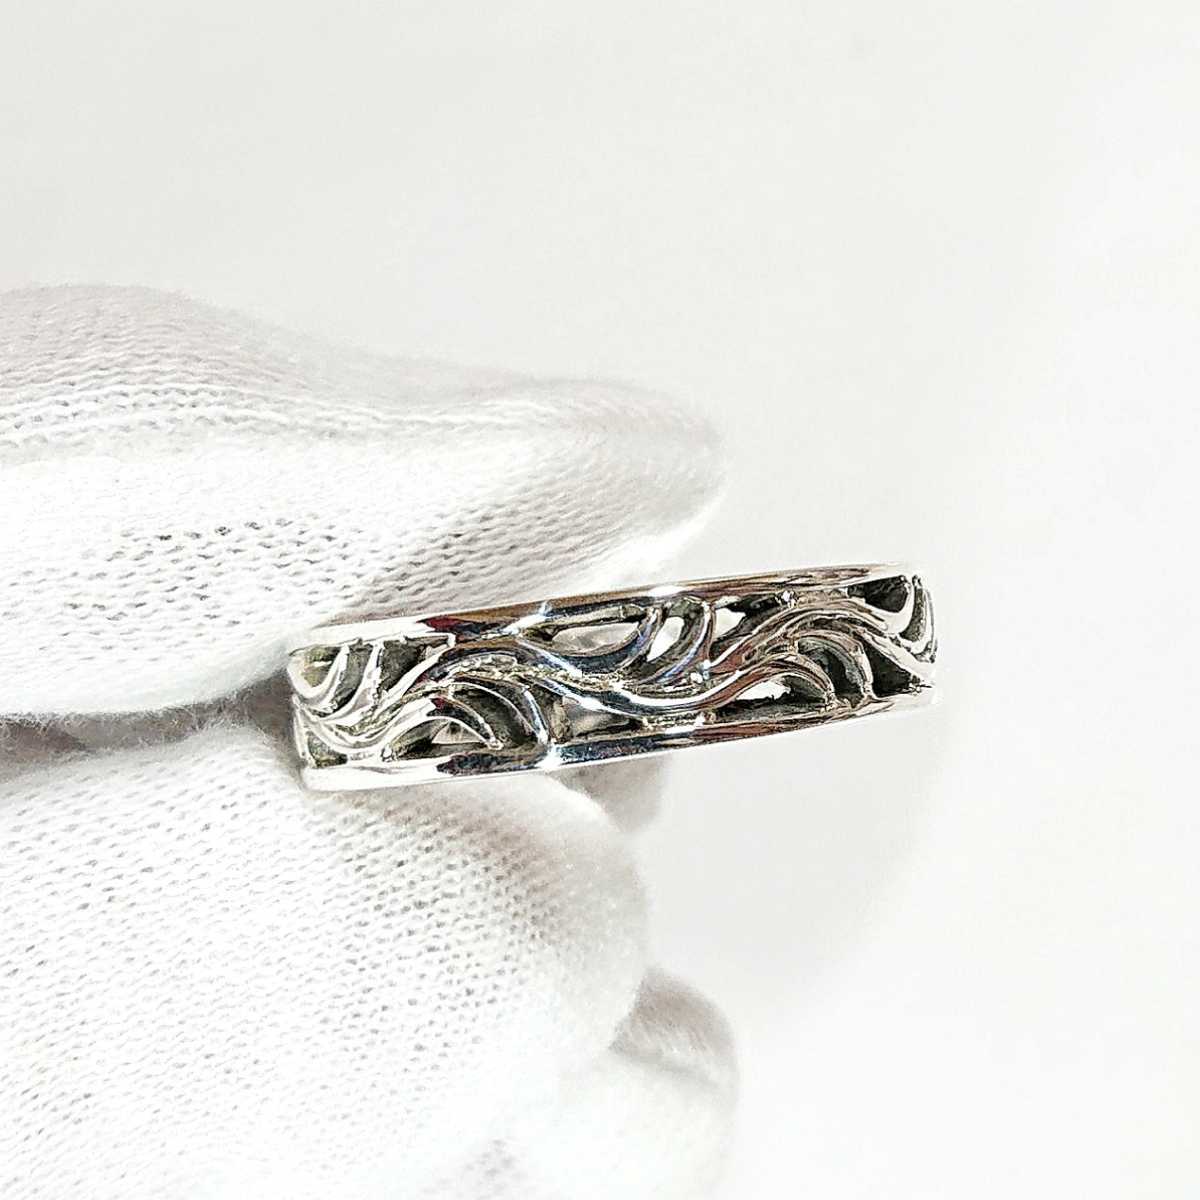 5368 SILVER925... carving ala Beth k ring 25 number silver 925to rival Tang . ivy flat strike . ivy simple unisex beautiful ring 